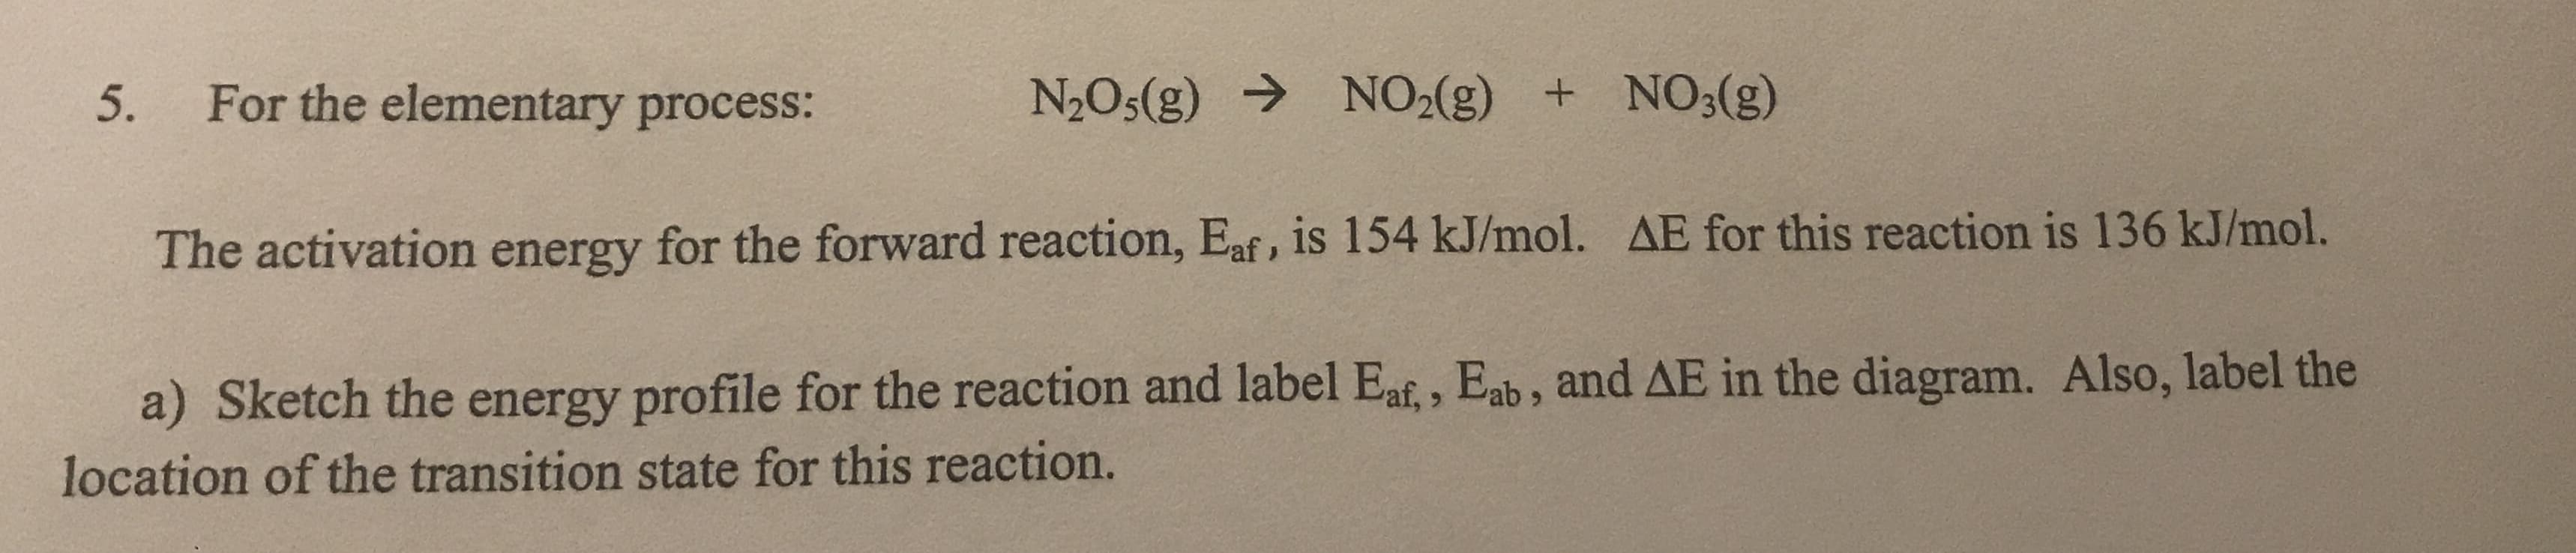 5.
For the elementary process:
N2O5(g) → NO2(g) + NO3(g)
The activation energy for the forward reaction, Eaf, is 154 kJ/mol. AE for this reaction is 136 kJ/mol.
a) Sketch the energy profile for the reaction and label Eaf,, Eab , and AE in the diagram. Also, label the
location of the transition state for this reaction.
